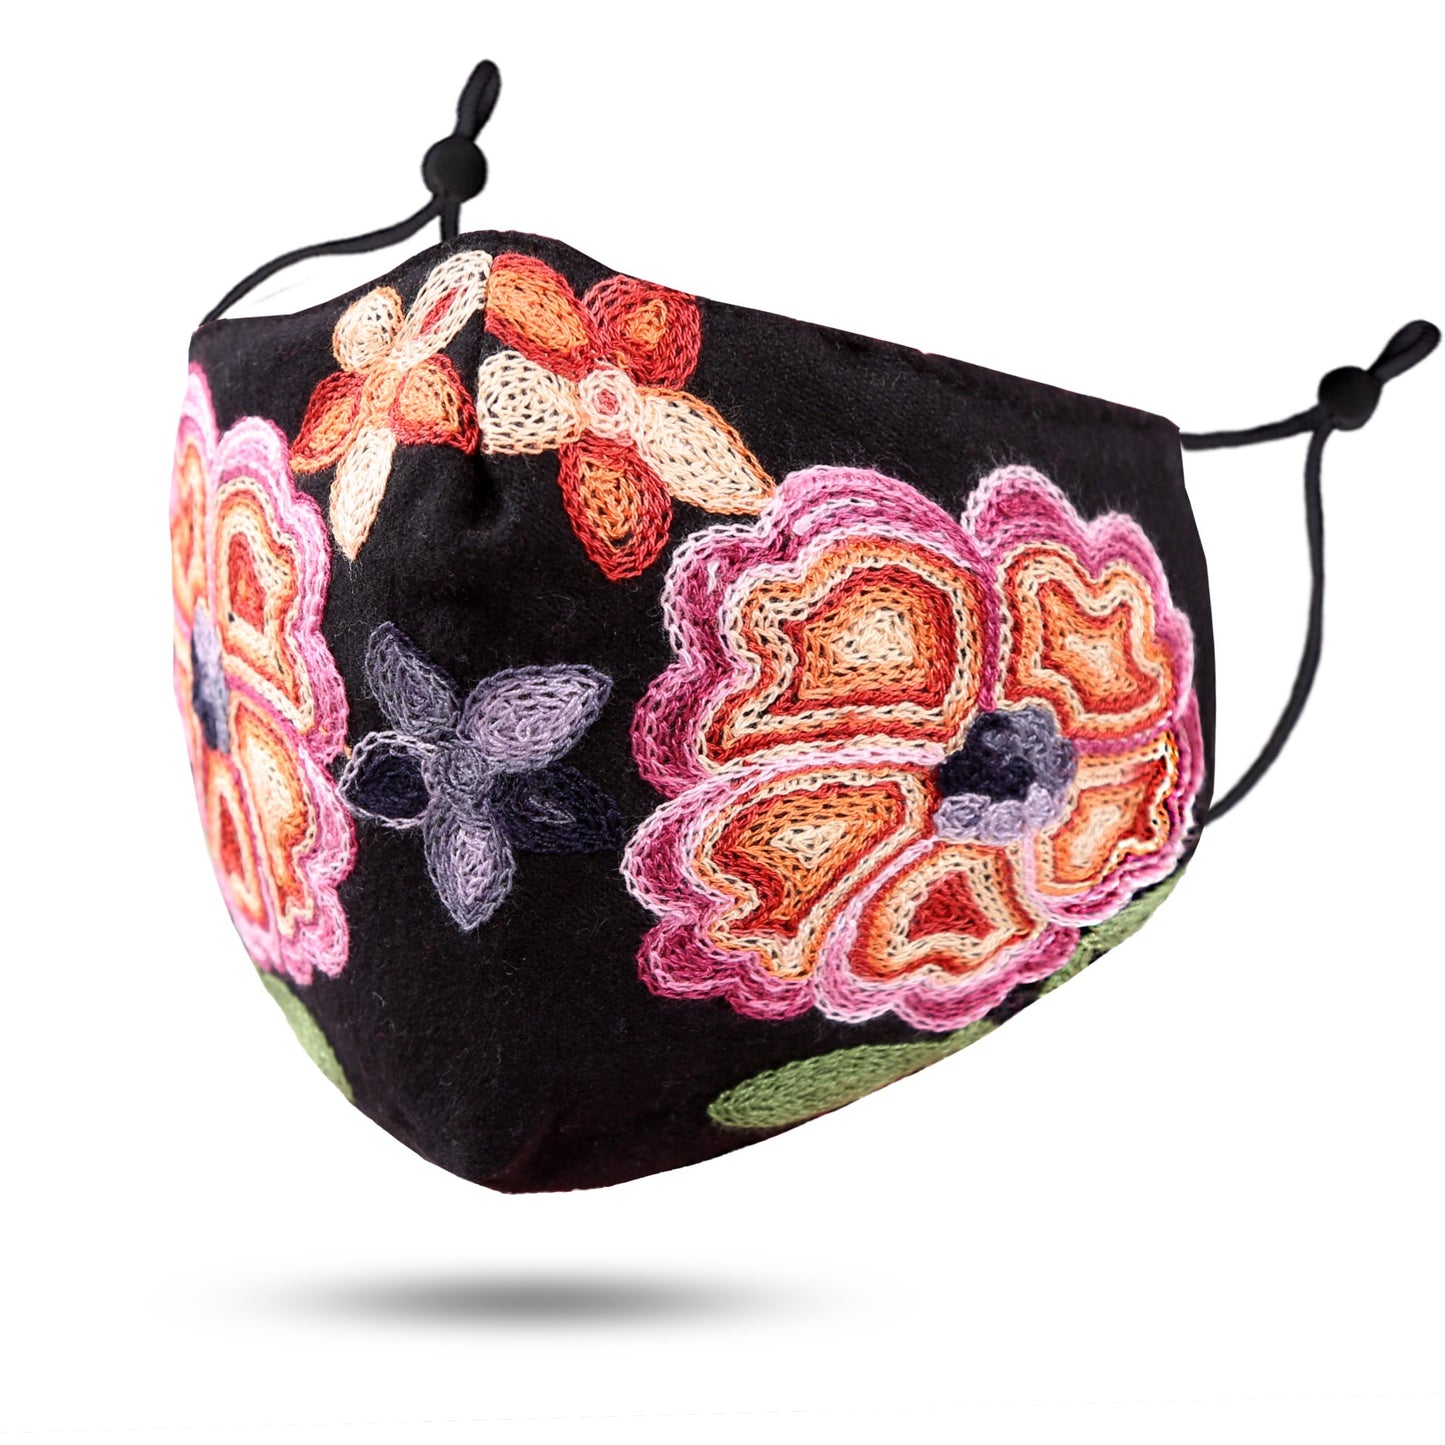 Embroidered Washable & Reusable Winter Cotton Face Mask W/ Diamond Shaped Lining & Filter Pocket 